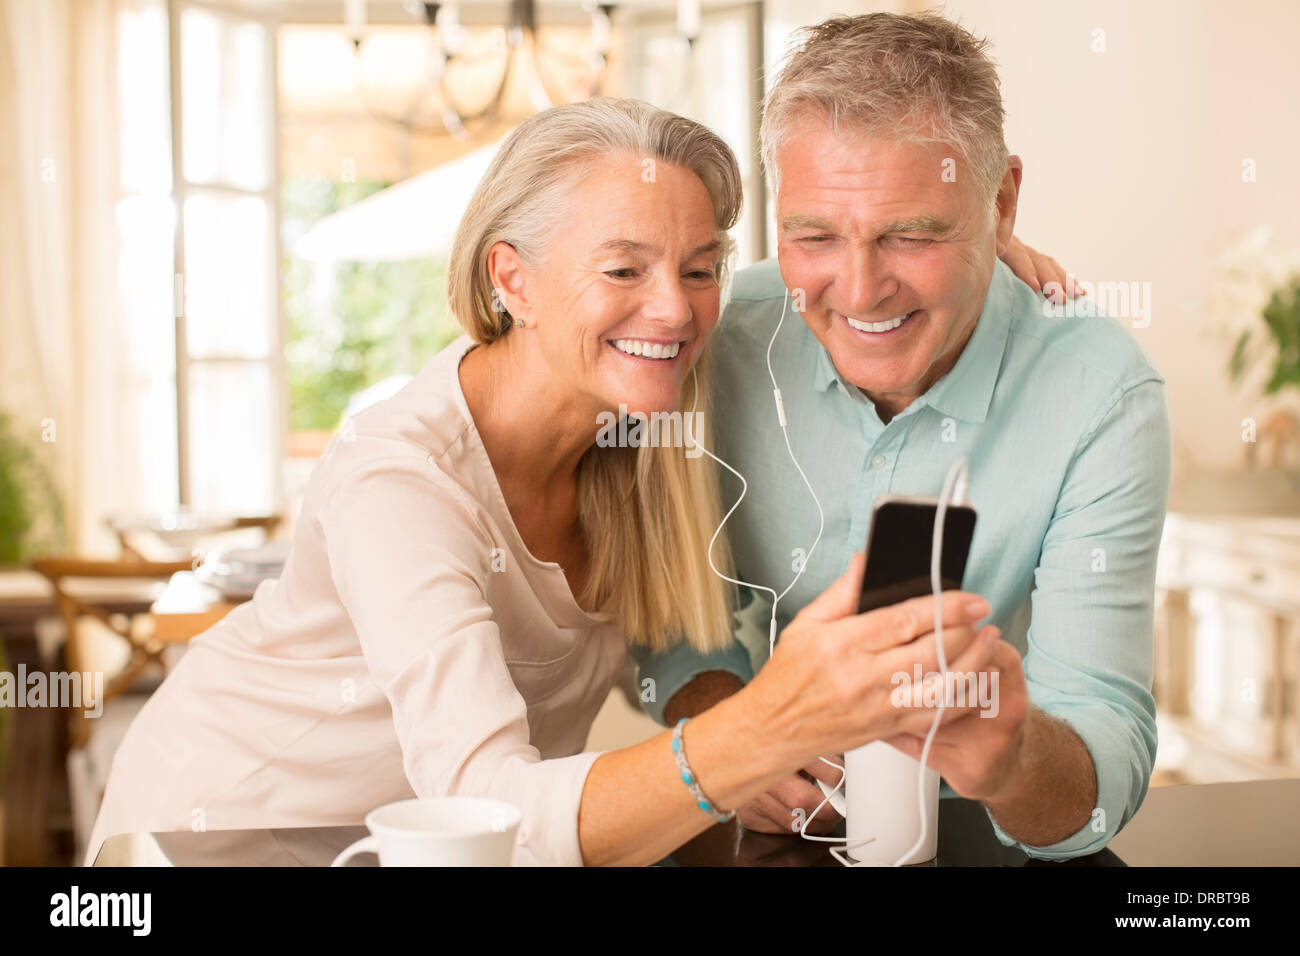 Senior couple sharing mp3 player in domestic kitchen Stock Photo